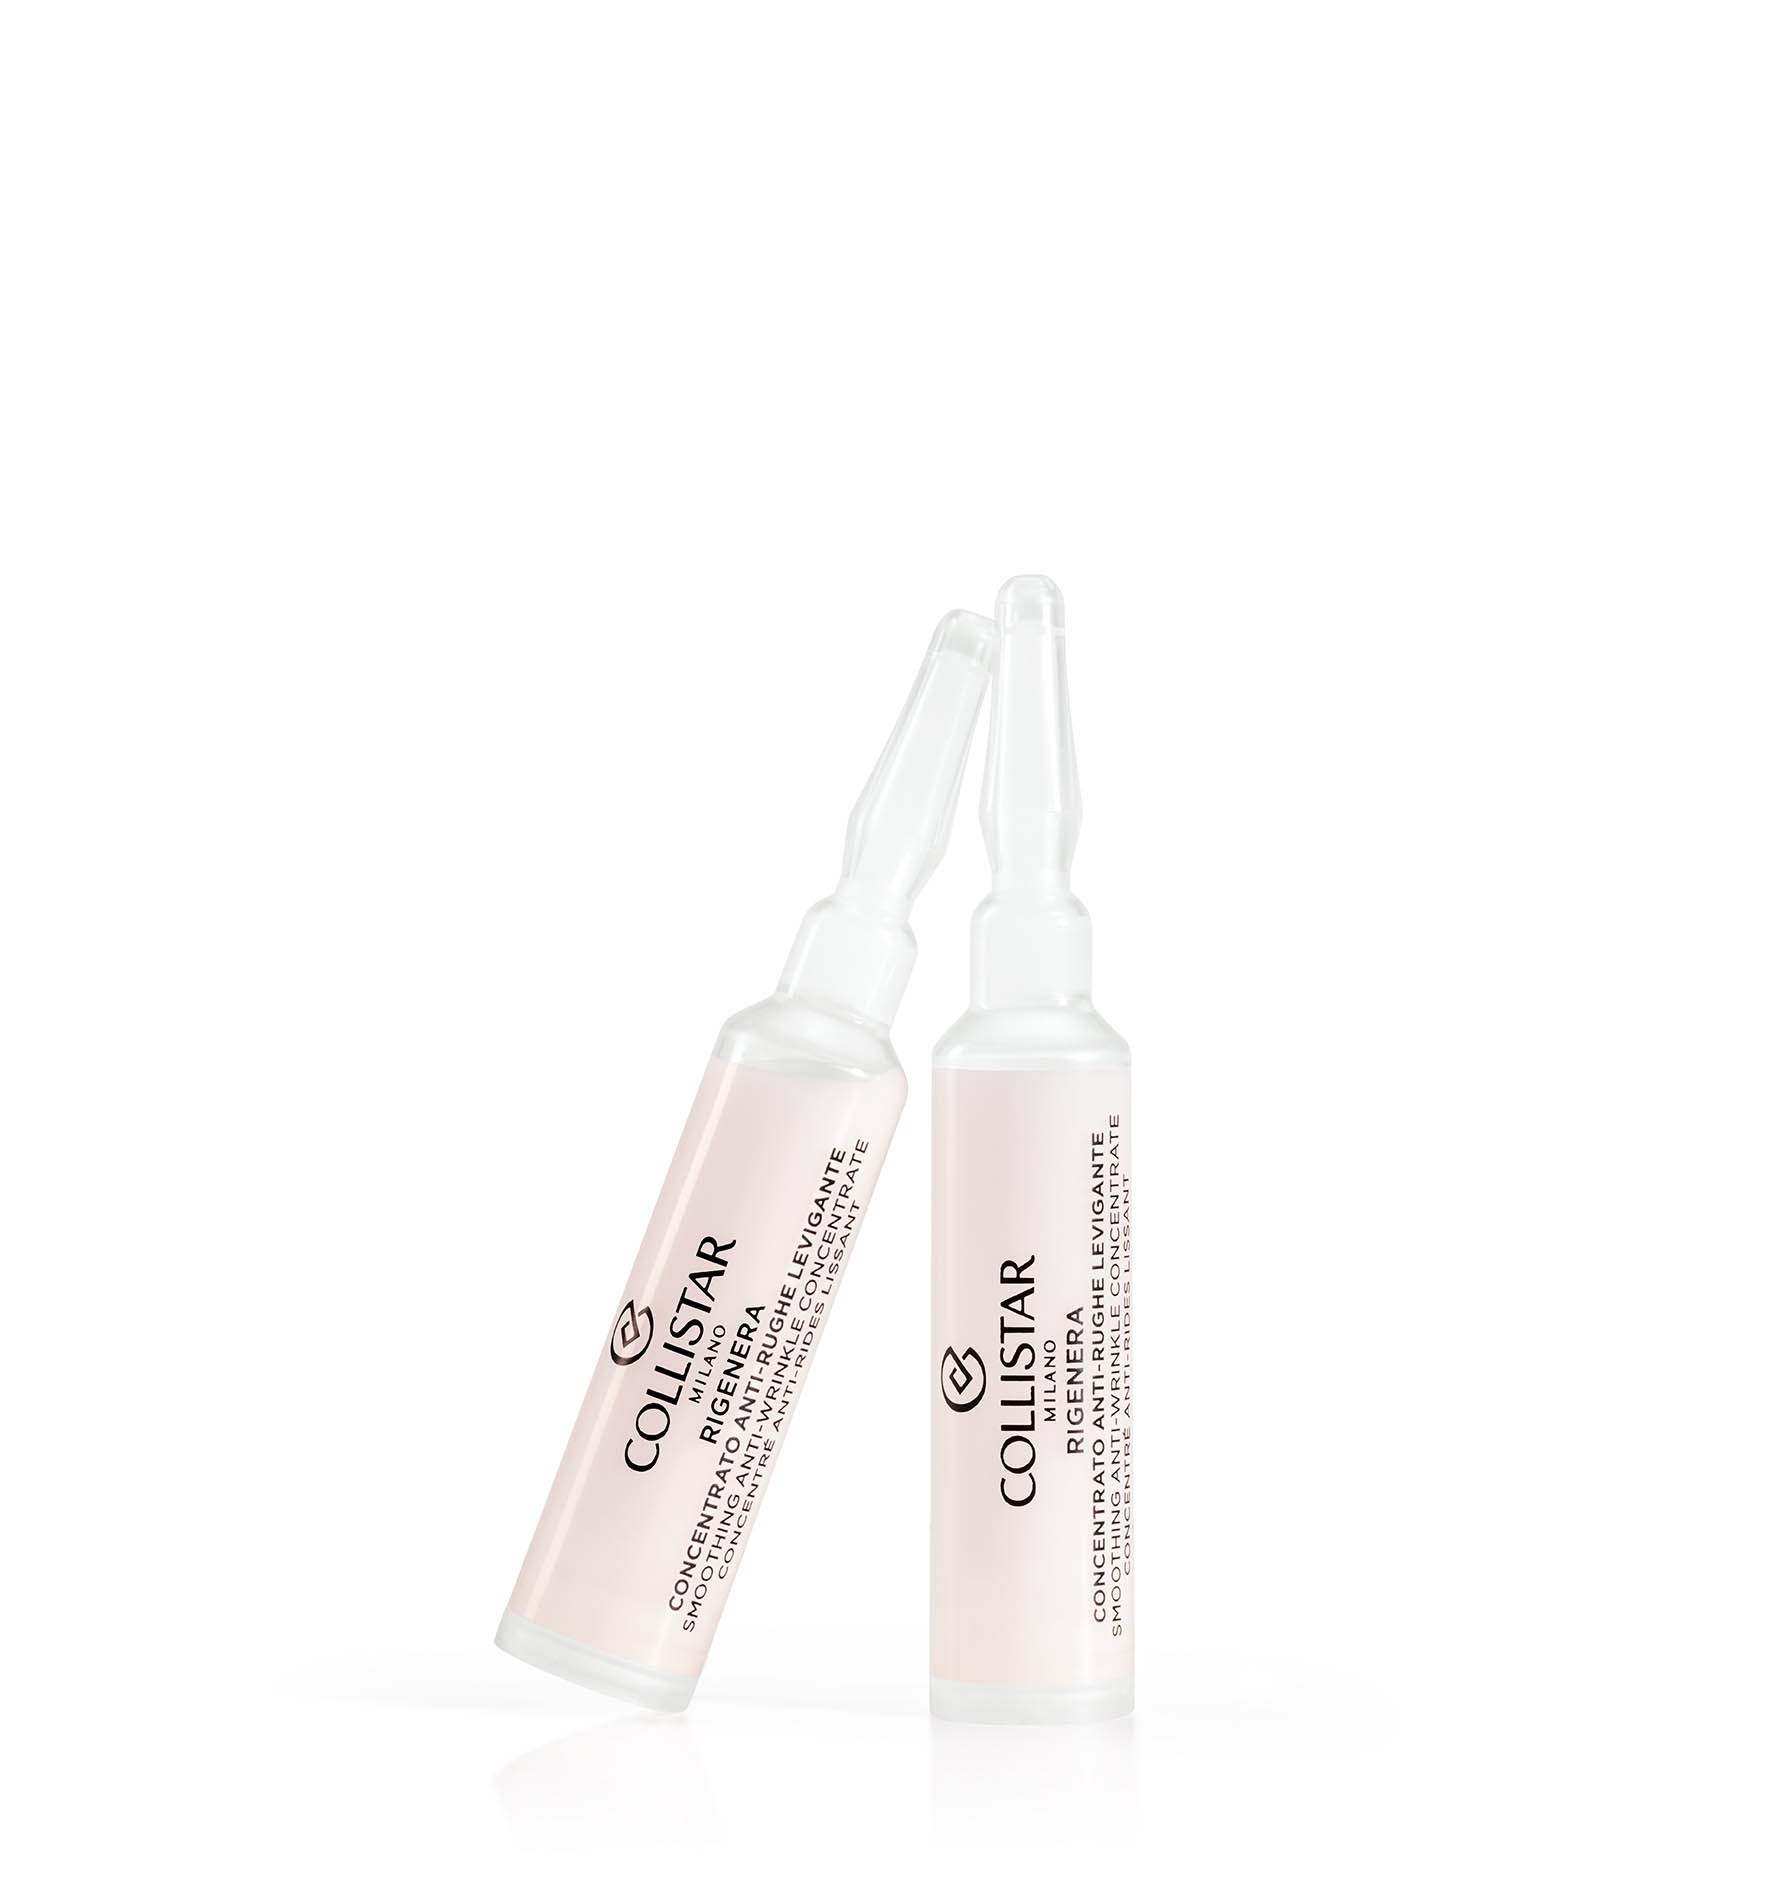 RIGENERA SMOOTHING ANTI-WRINKLE
CONCENTRATE - Face | Collistar - Shop Online Ufficiale